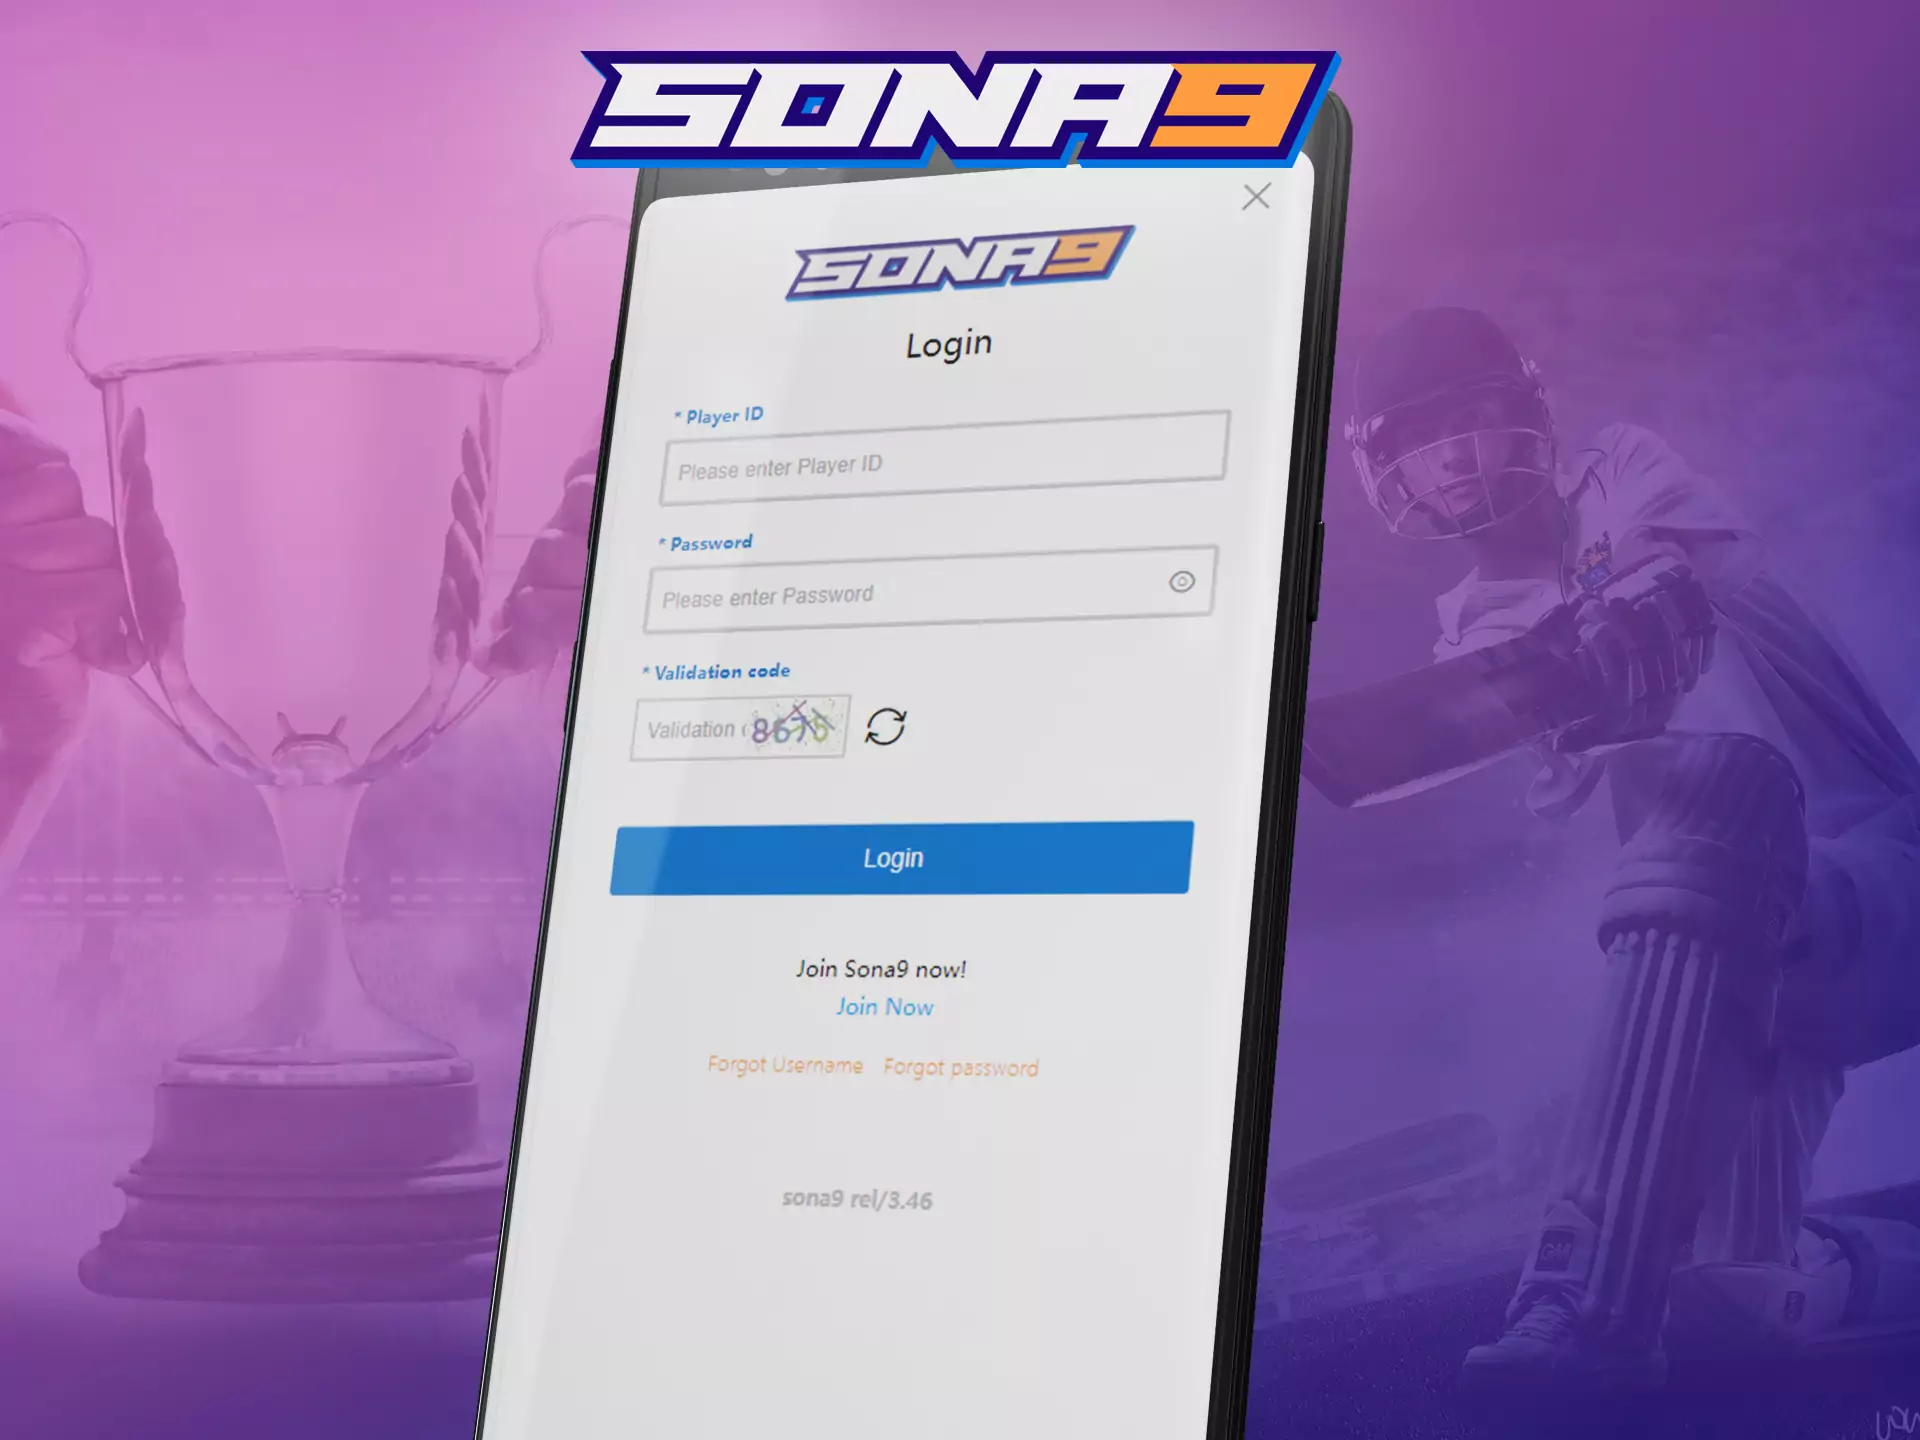 Use your ID and password to log into your Sona9 account in the app.